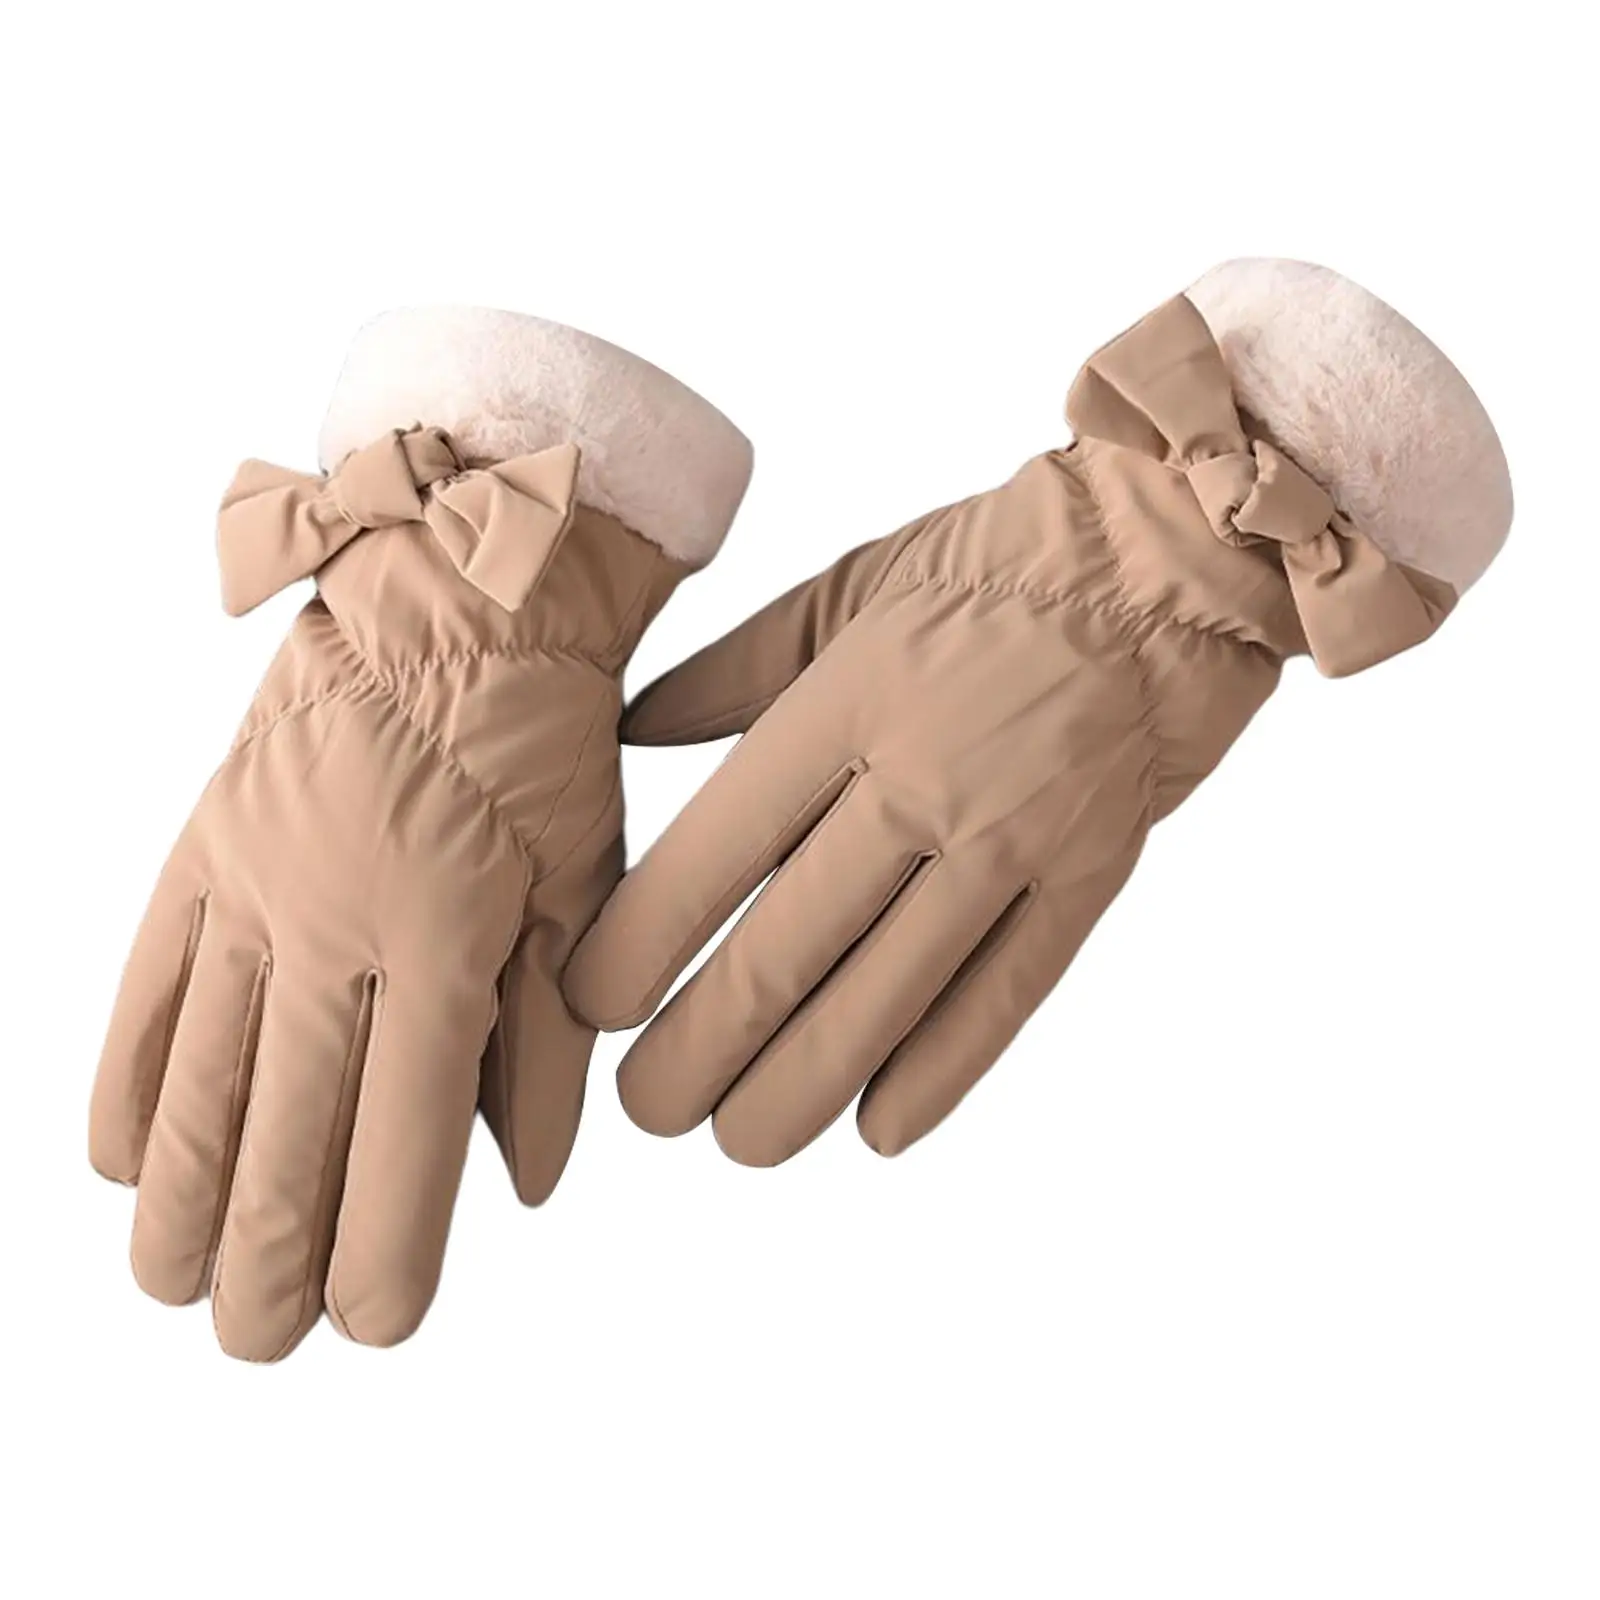 Womens Winter Warm Gloves with Screen Texting Fingers, Fleece Lined Windproof Gloves